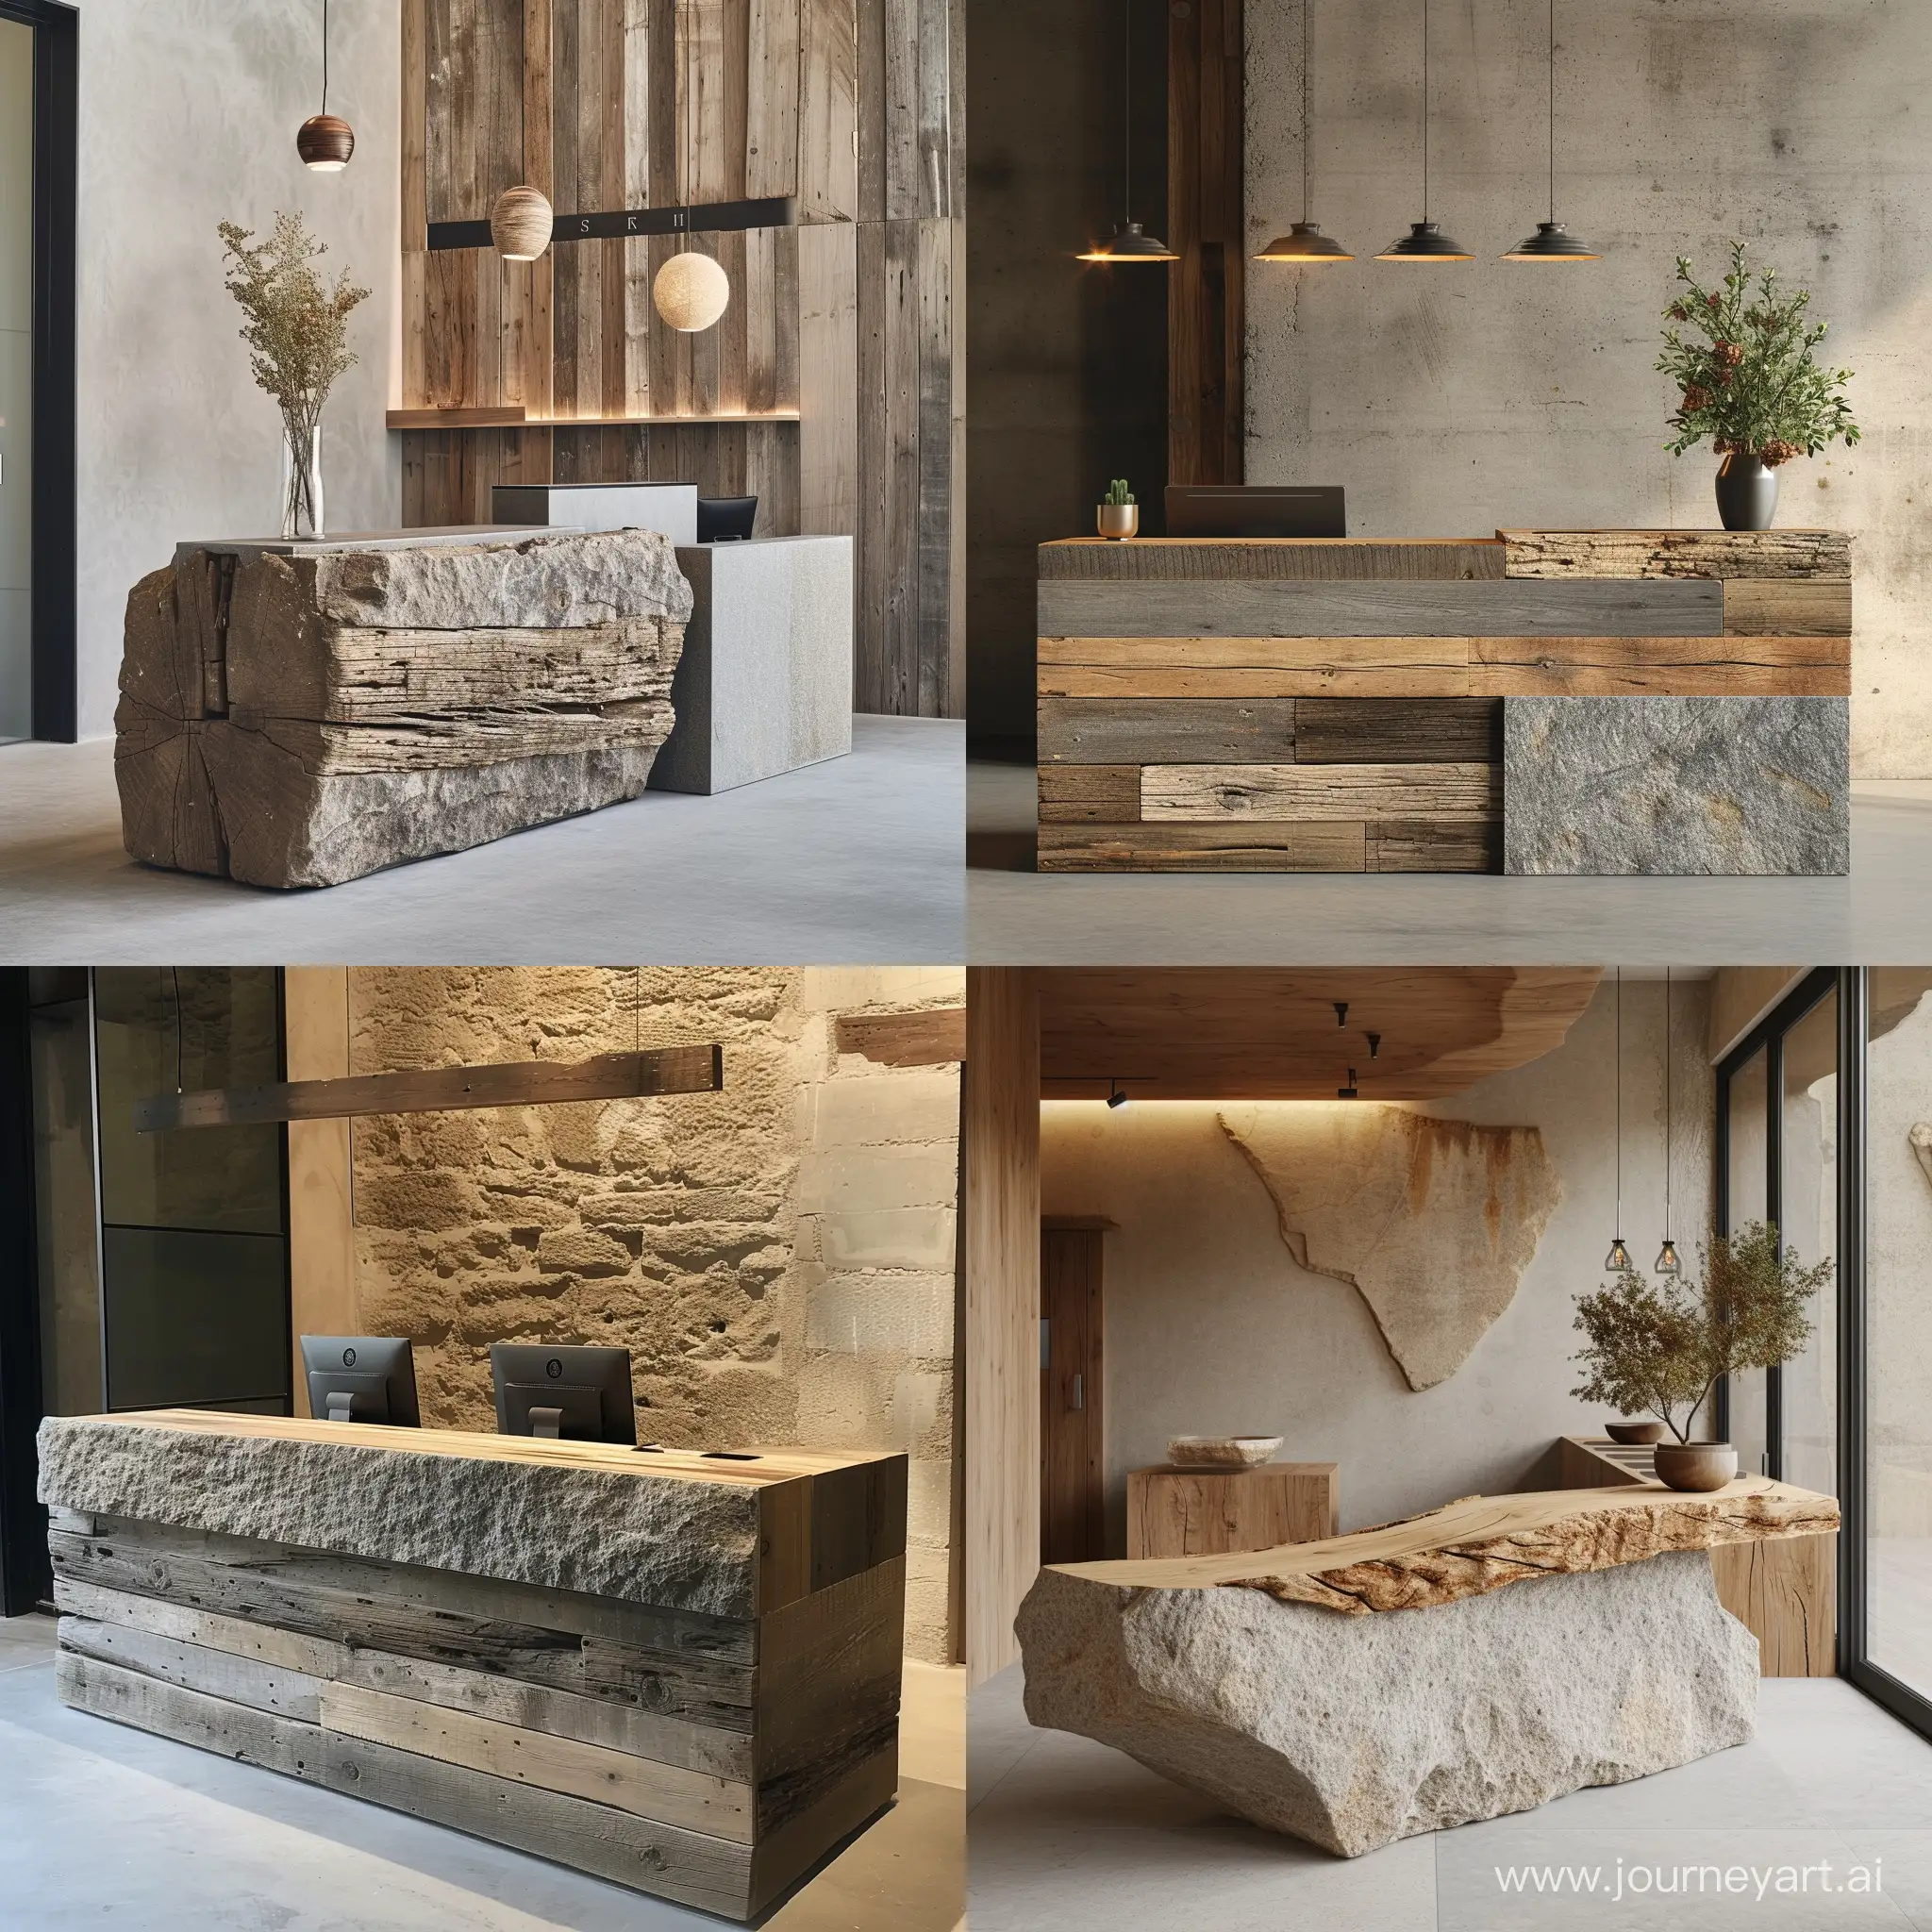 imagine an image of Reception Desk: "At the entrance, the reception desk (150cm L x 75cm W x 90cm H, 50kg) crafted from reclaimed wood and stone welcomes visitors, embodying the showroom's commitment to sustainability."realistic style